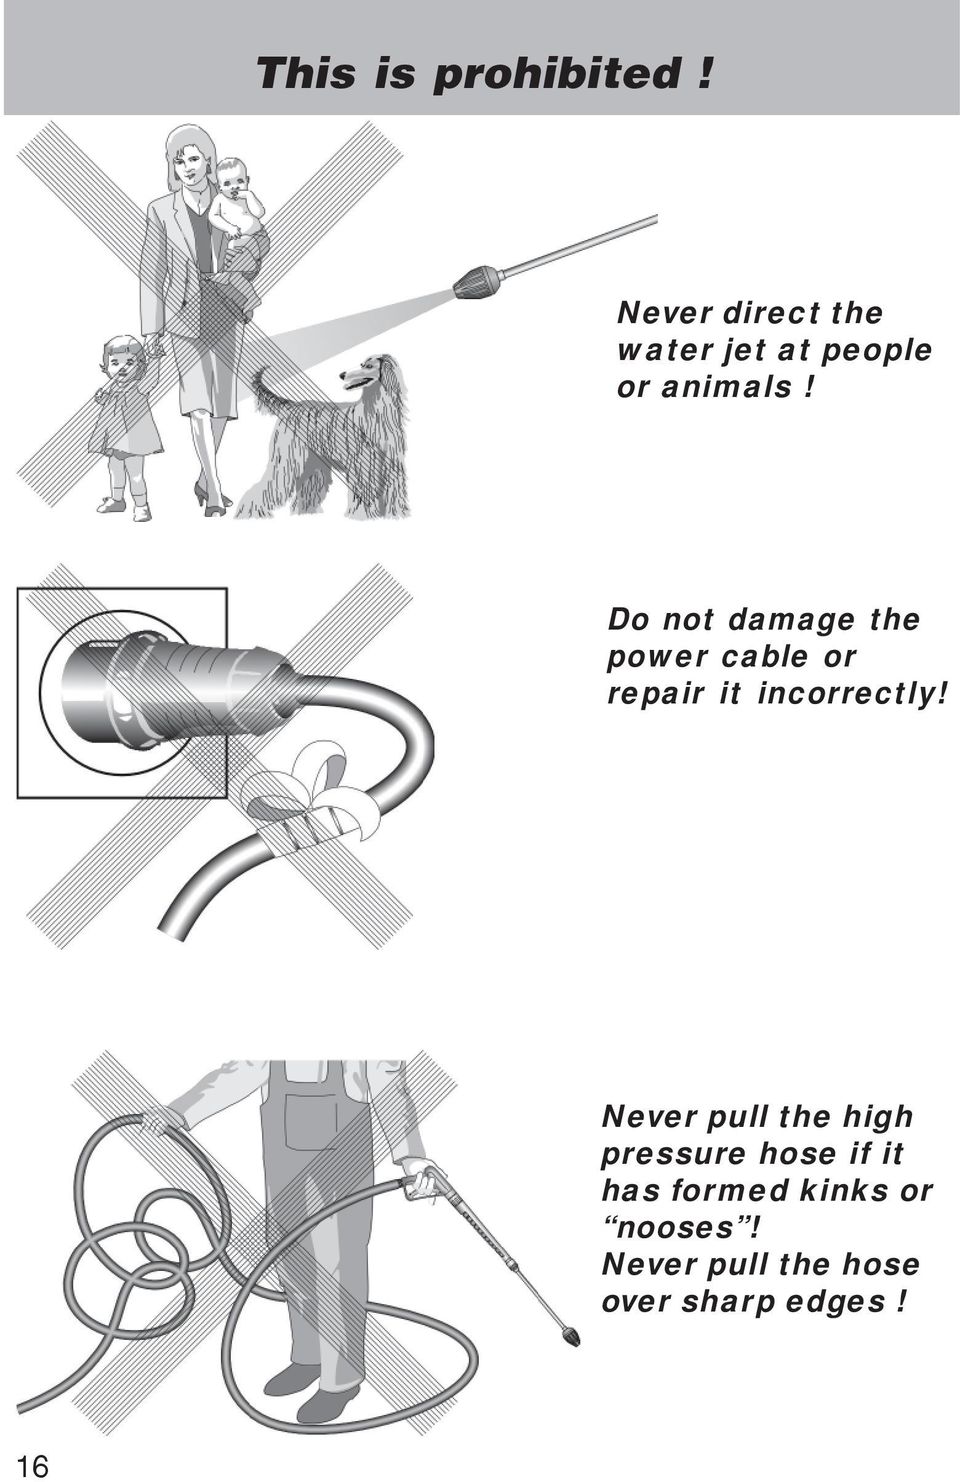 Do not damage the power cable or repair it incorrectly!